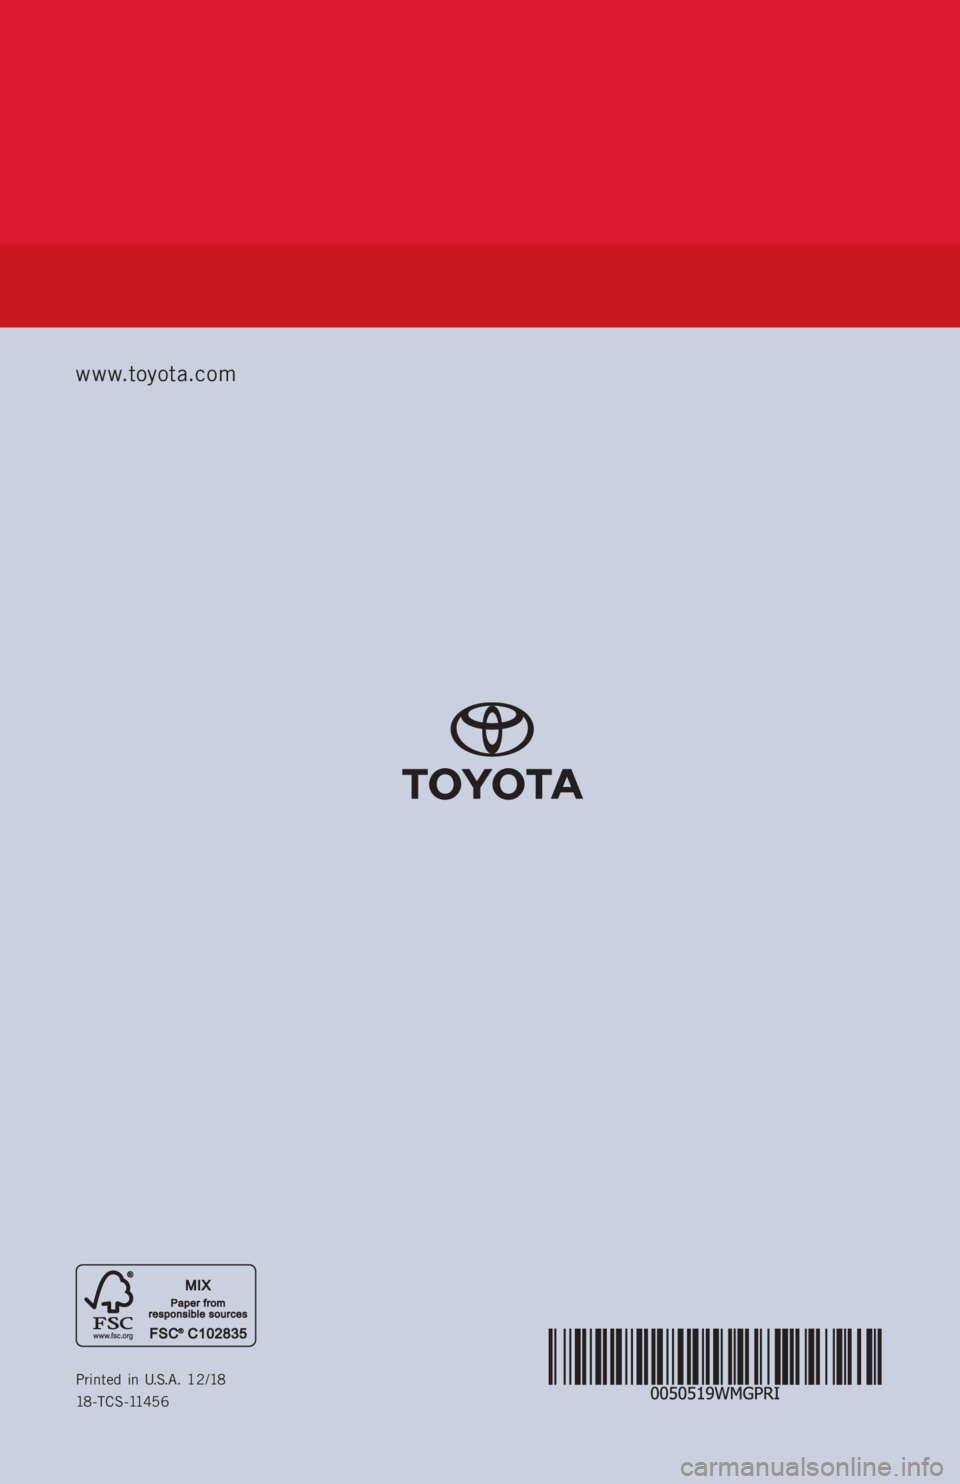 TOYOTA PRIUS 2019  Warranties & Maintenance Guides (in English) Printed in U.S.A. 12/18
18-TCS-11456
www.toyota.com 